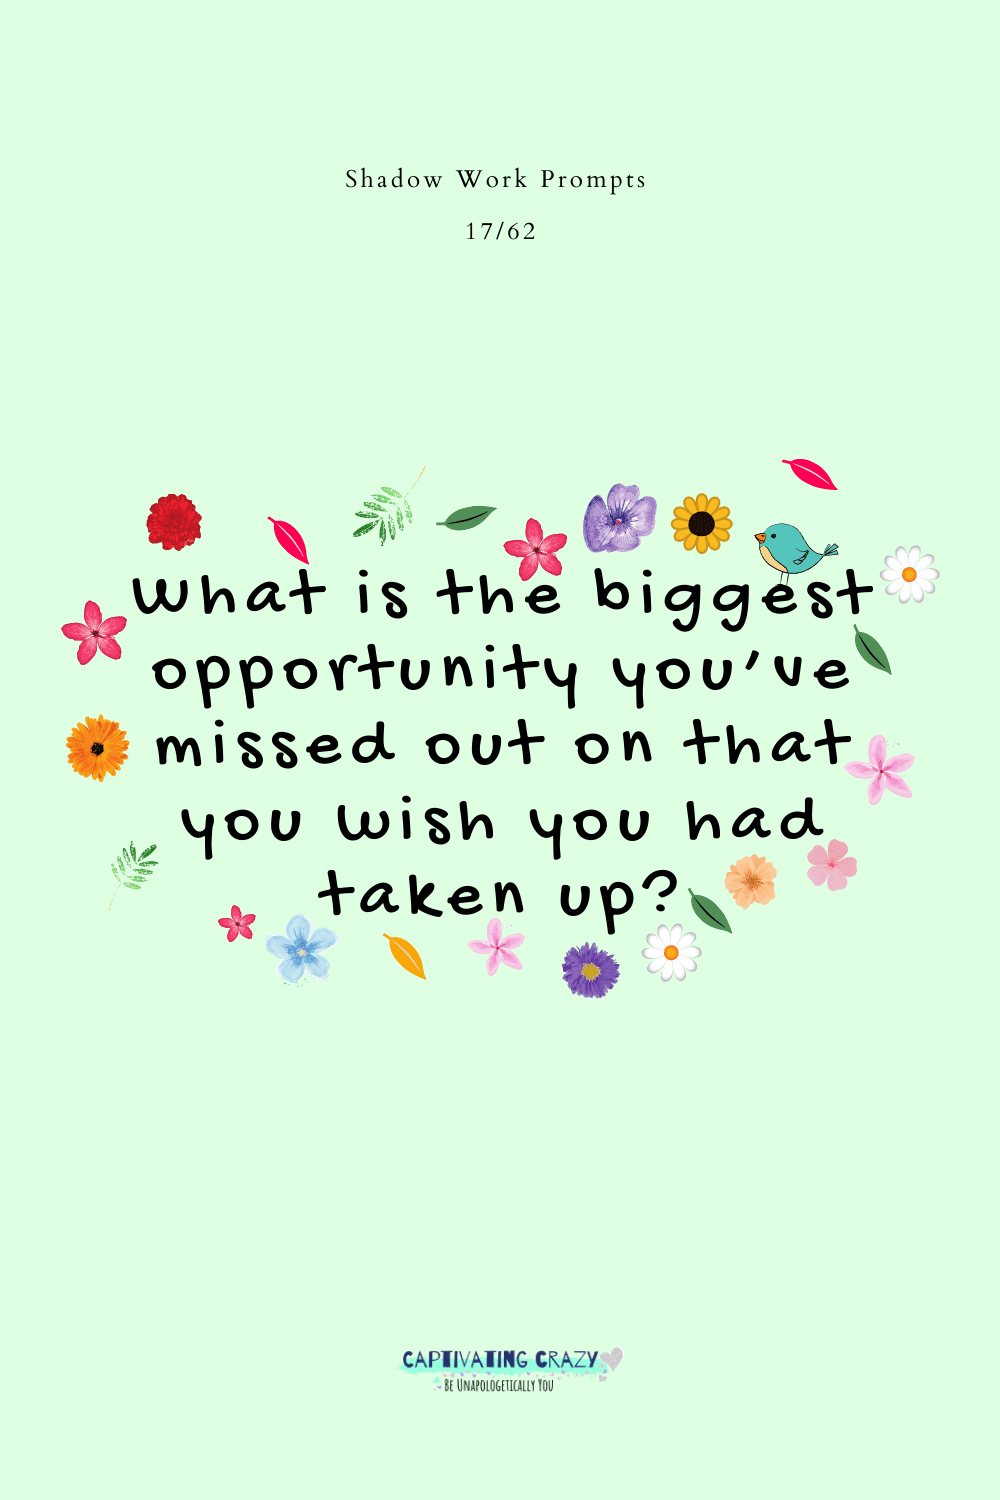 What is the biggest opportunity you've missed out on that you wish you had taken up?